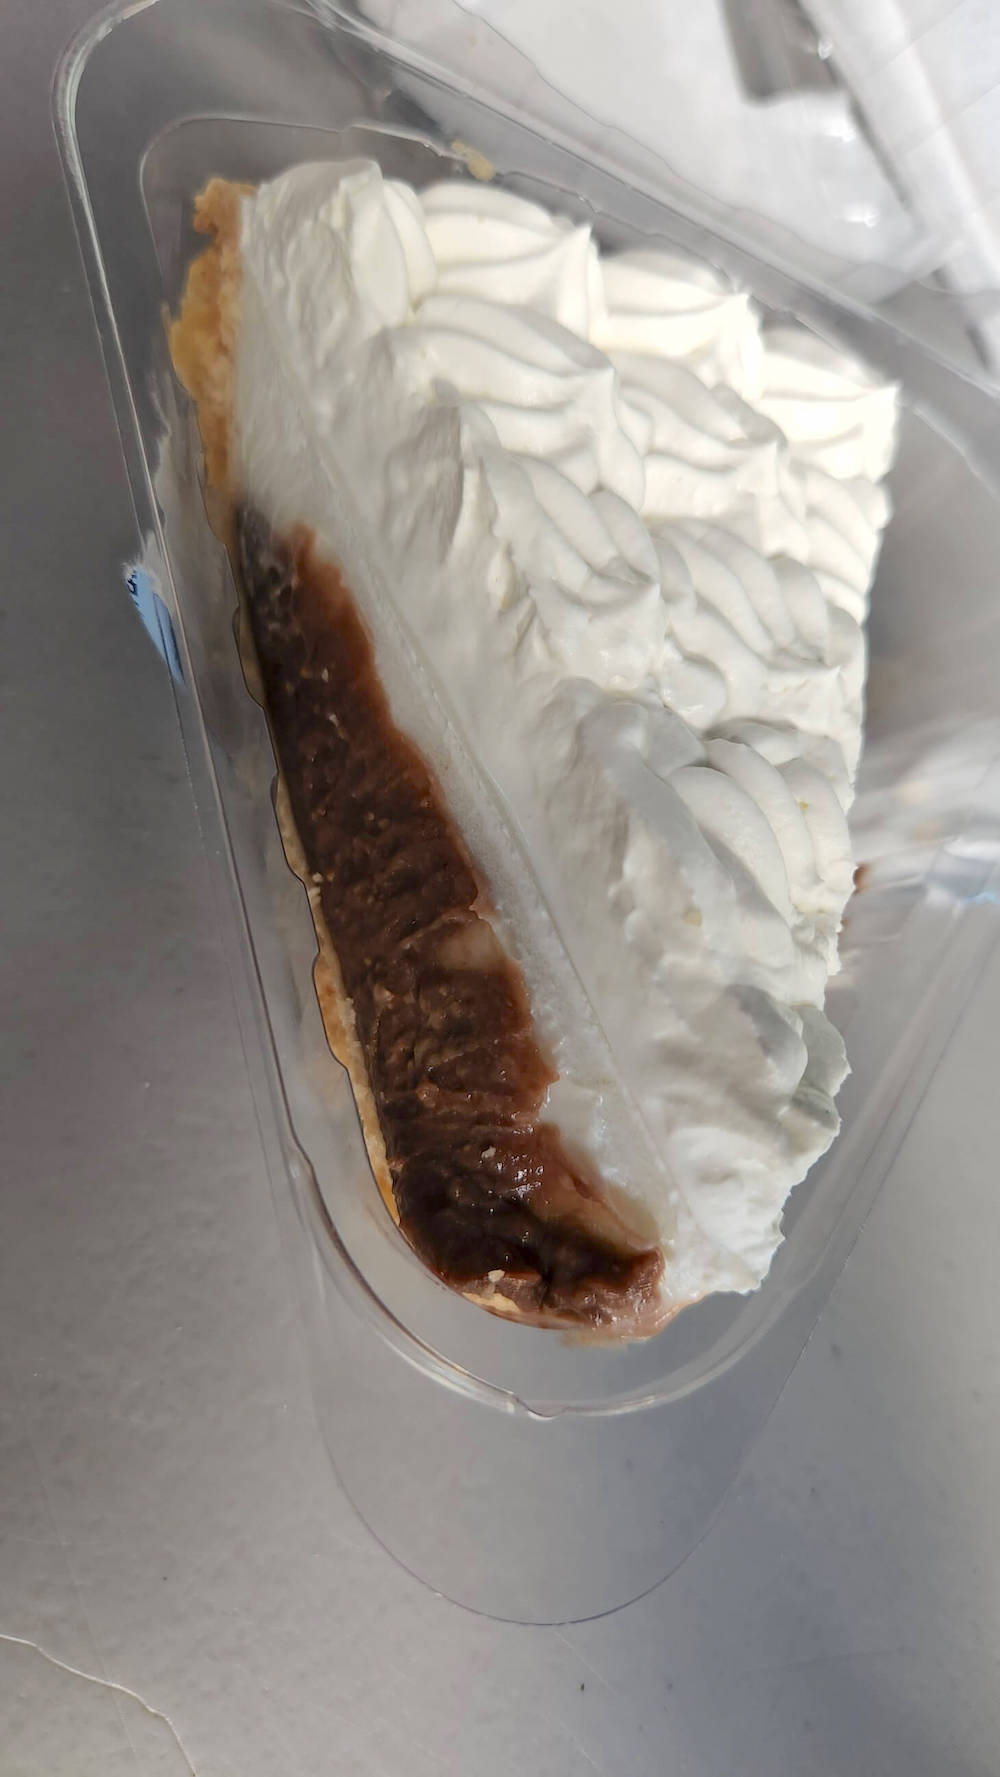 Image of a slice of chocolate haupia pie from Ted's Bakery on Oahu